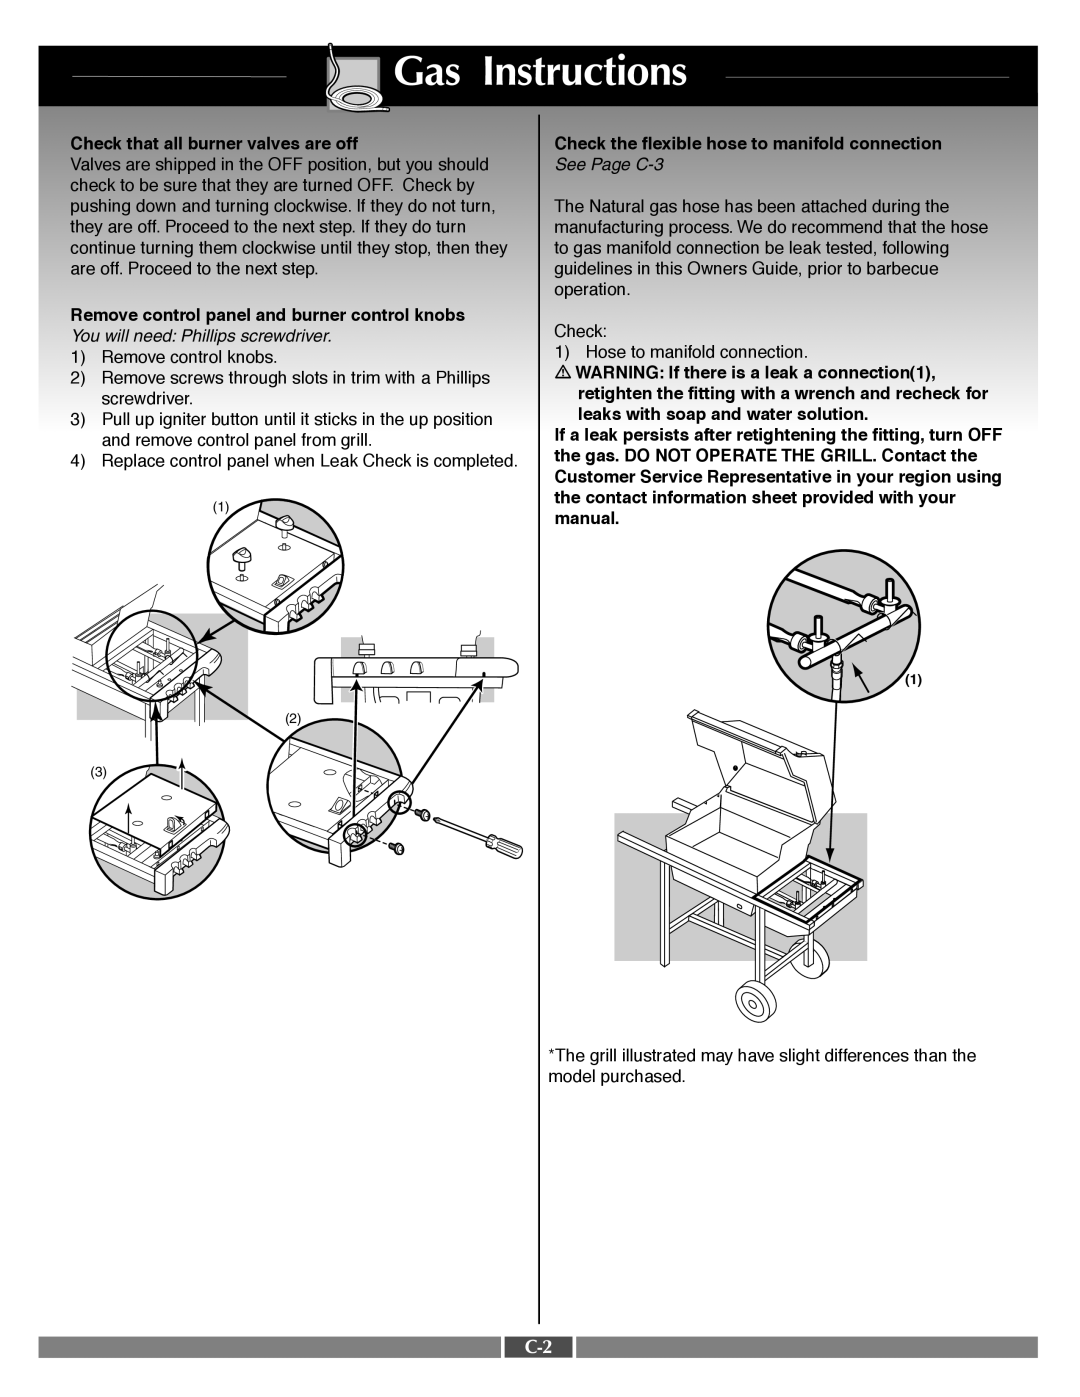 Weber 55548 manual Gas Instructions, Check that all burner valves are off, Remove control panel and burner control knobs 